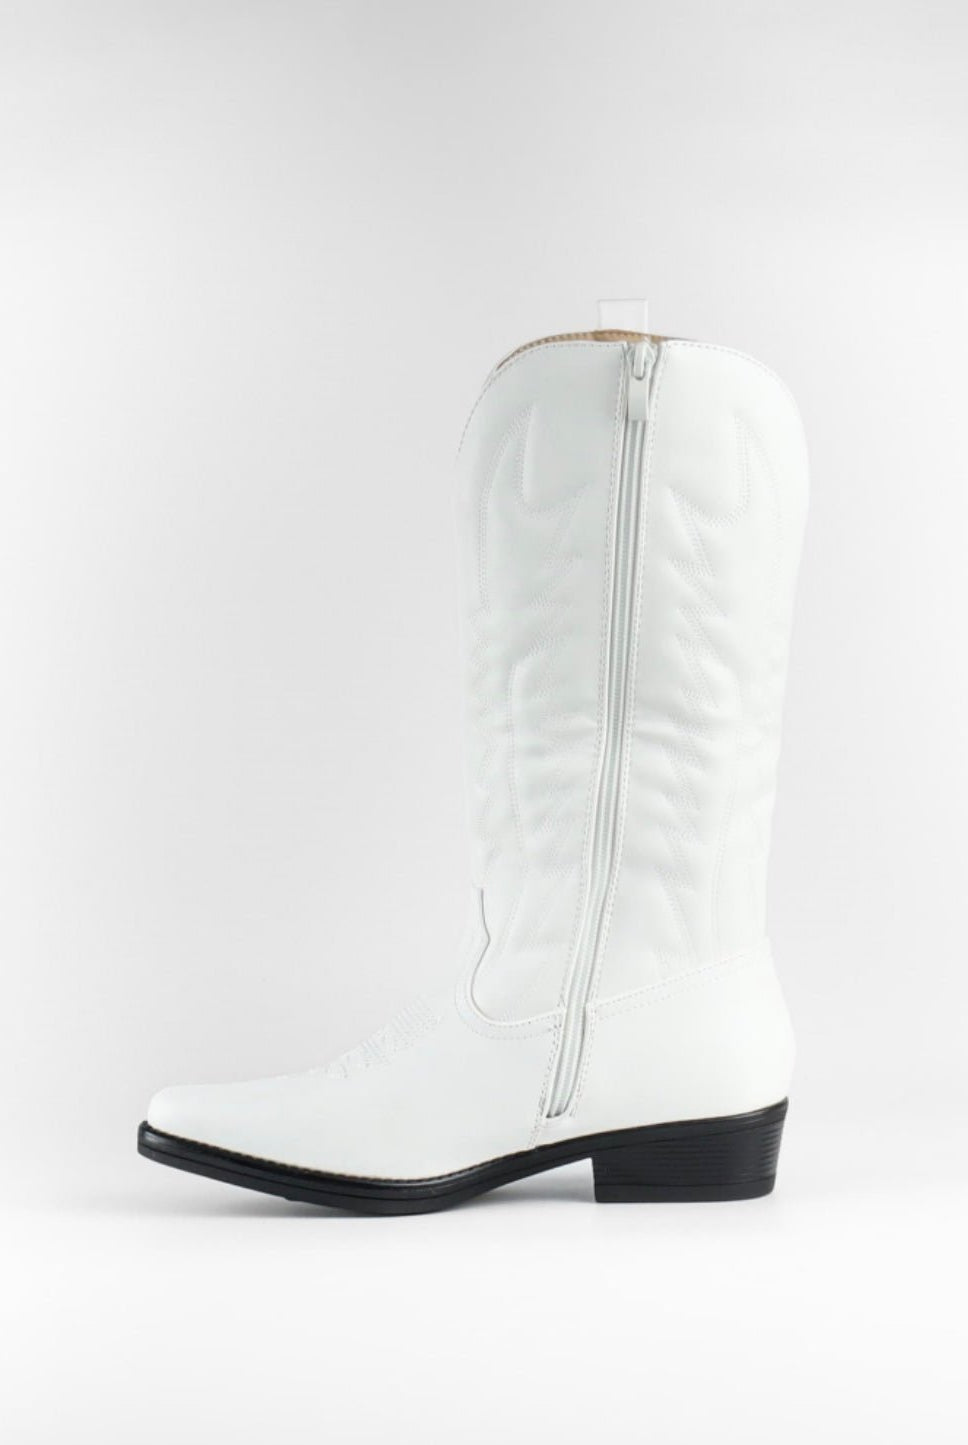 ♥︎COWBOY BOOTS WHITE - PRE ORDER - My Favourites